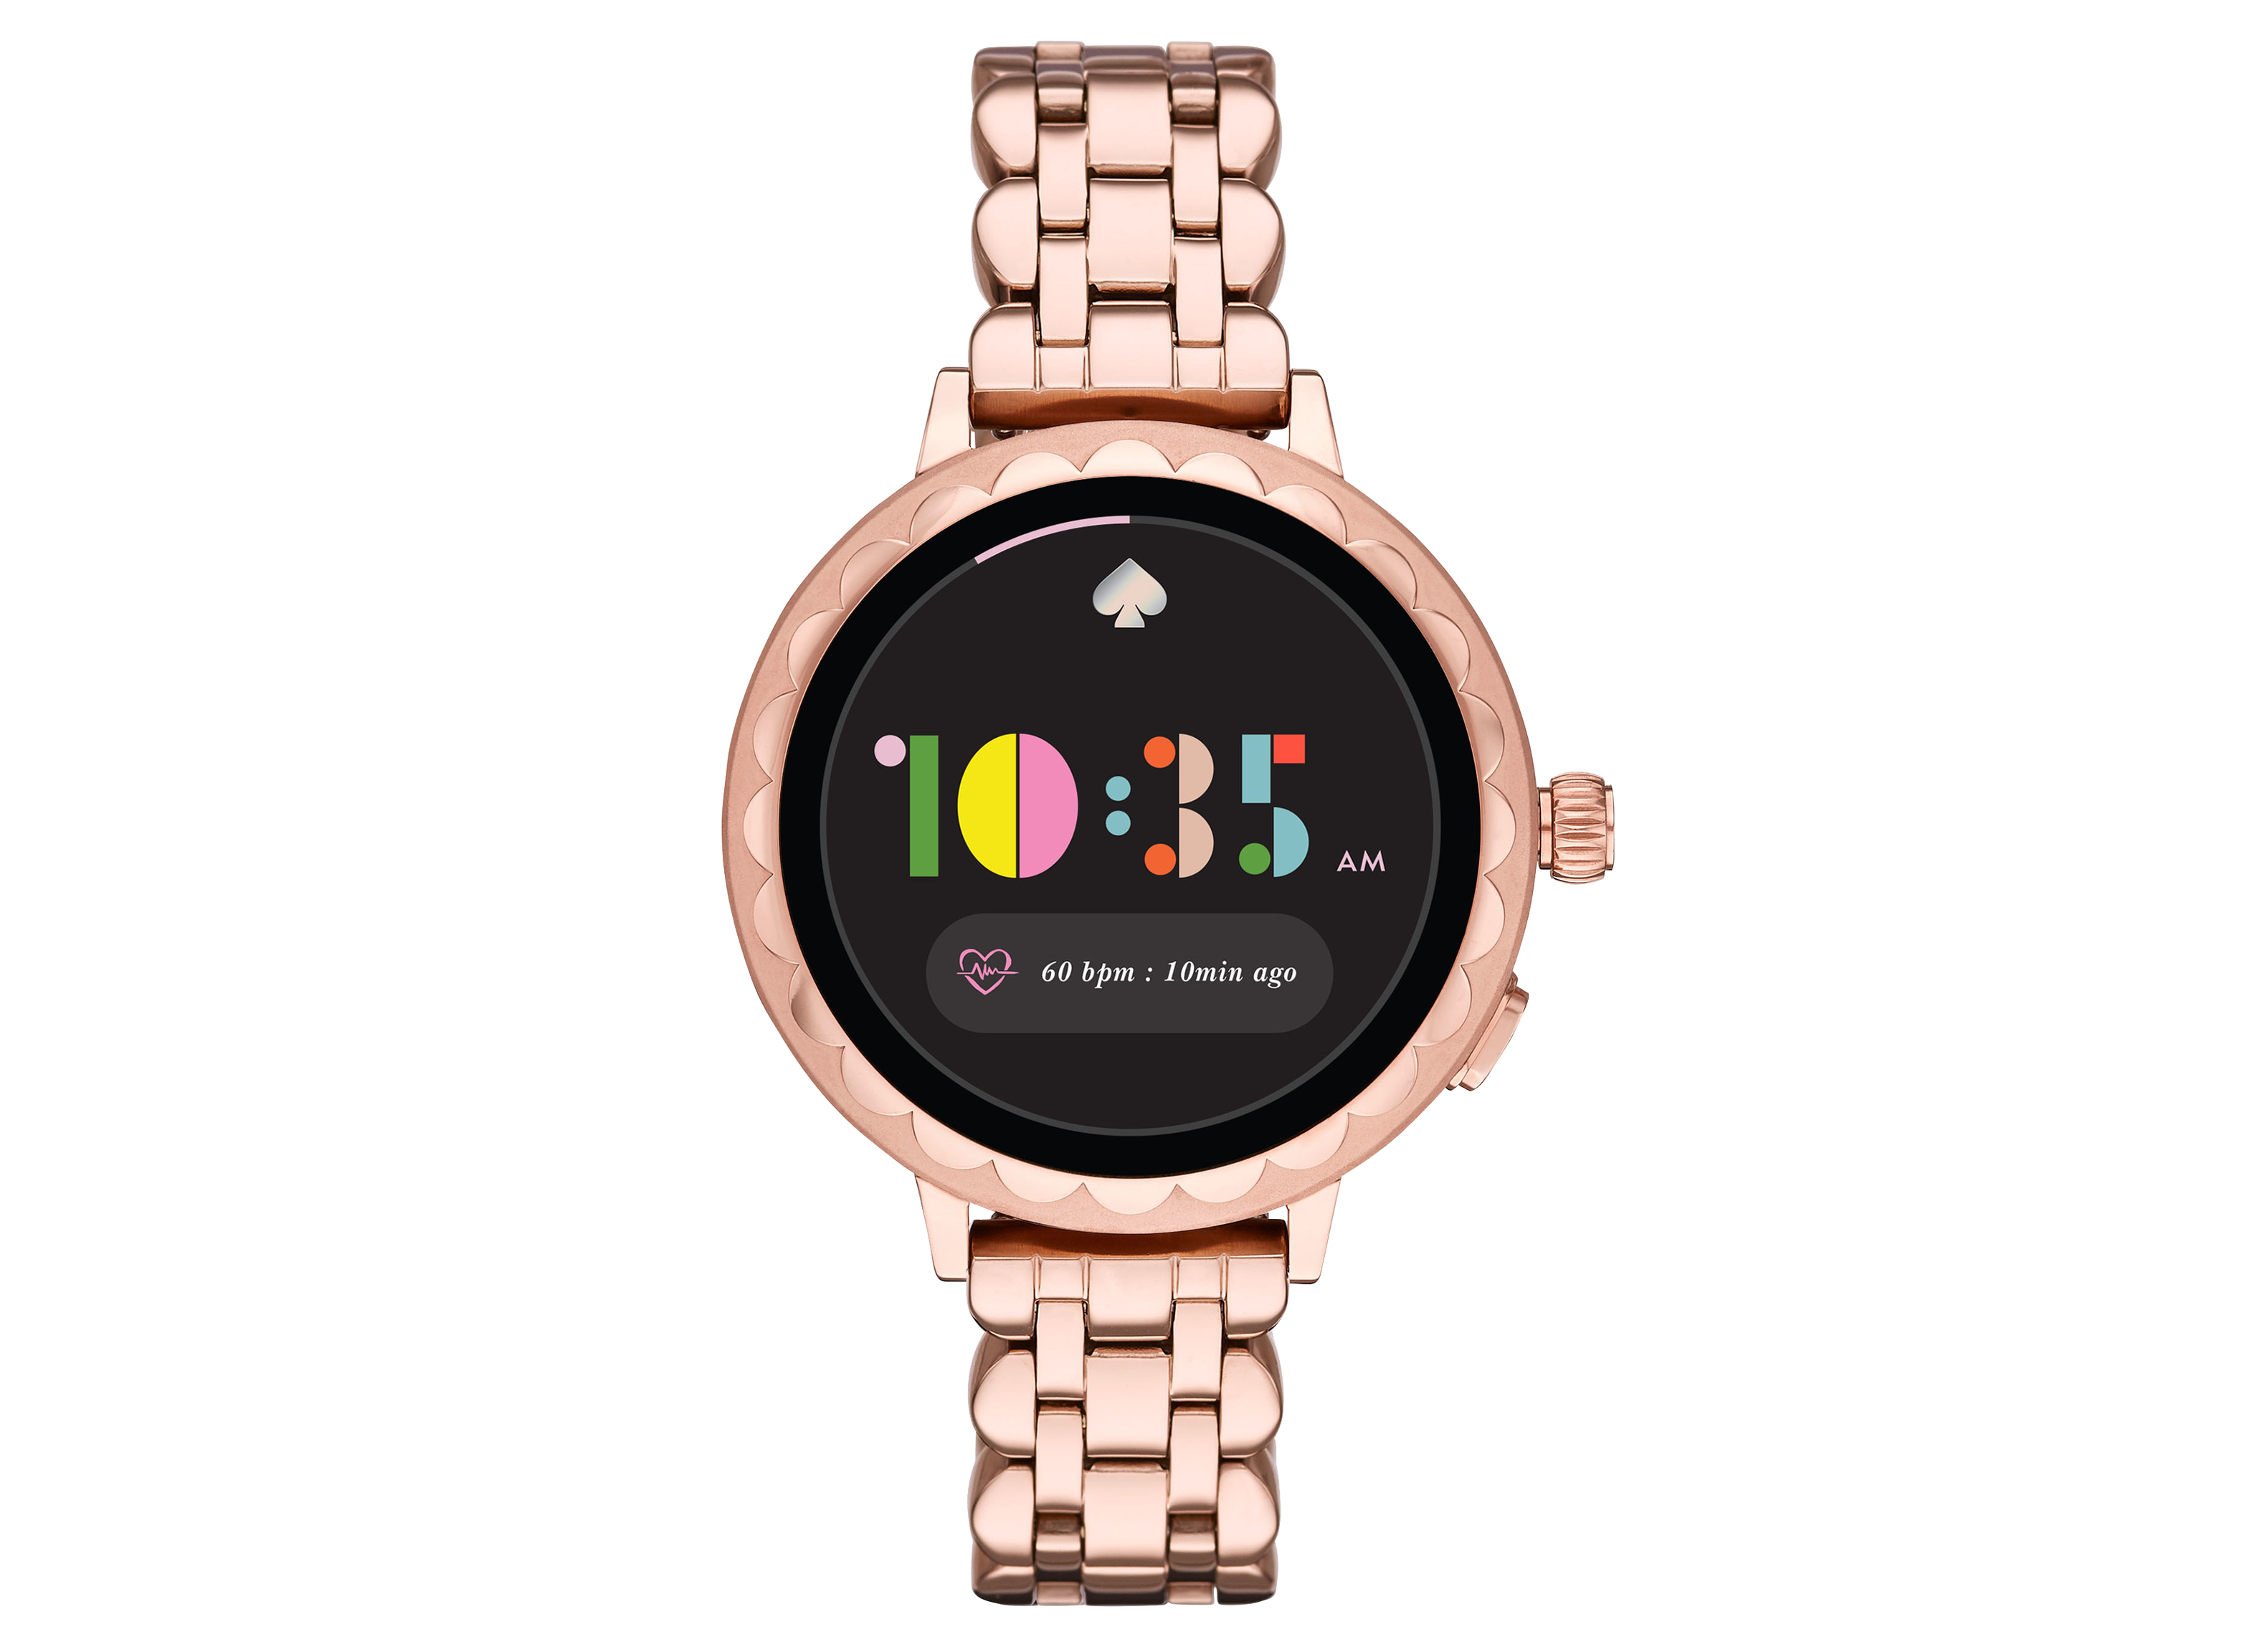 Kate Spade Scallop 2 Smartwatch Review - Consumer Reports